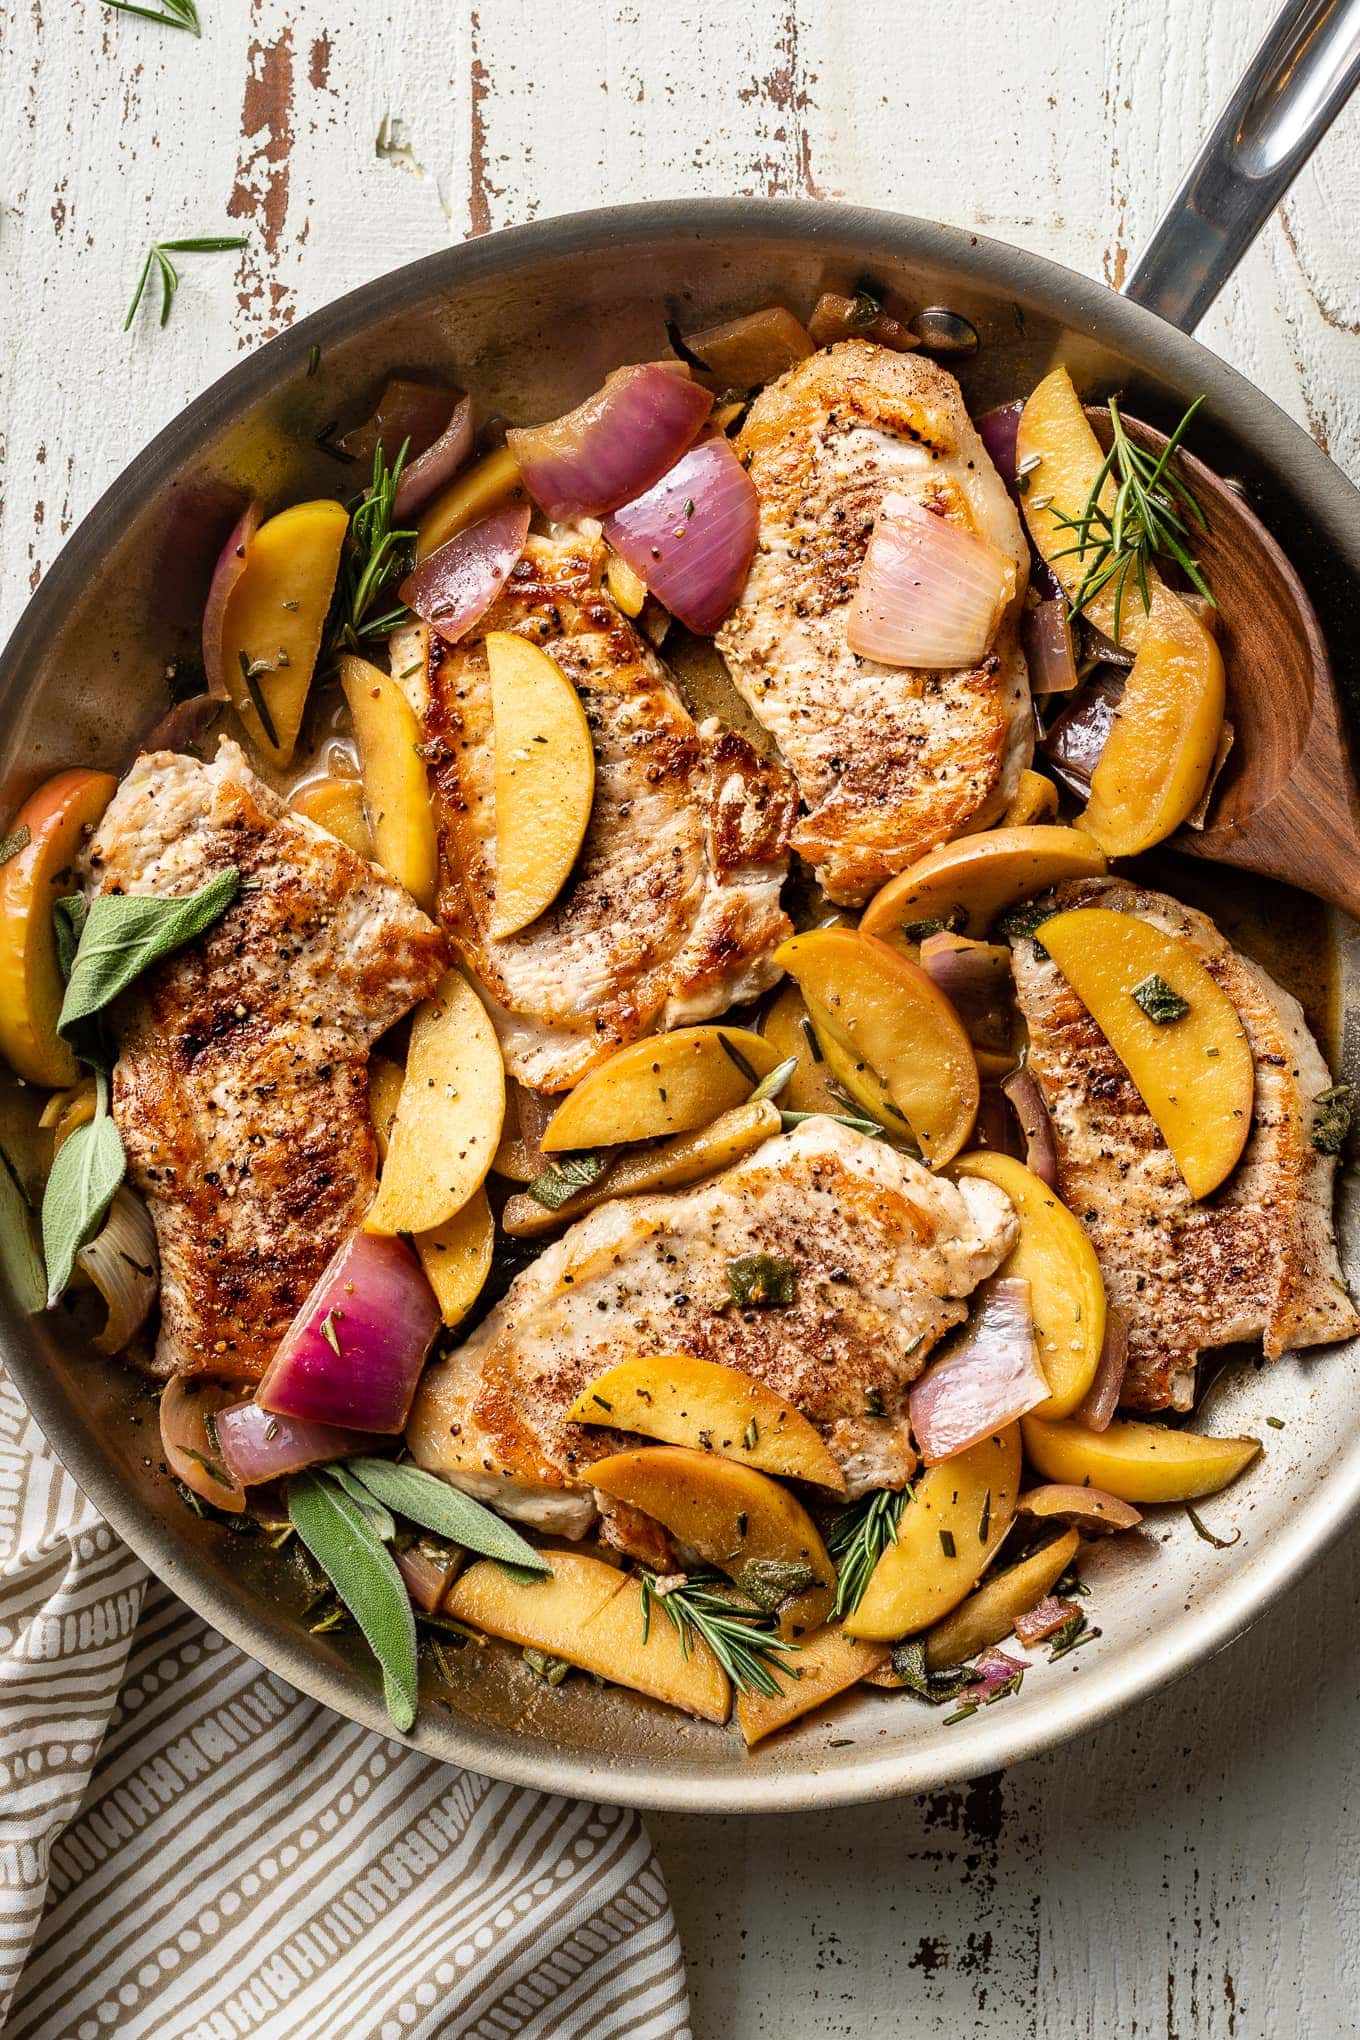 https://www.nourish-and-fete.com/wp-content/uploads/2019/11/pork-chops-with-apples-1360px-2.jpg